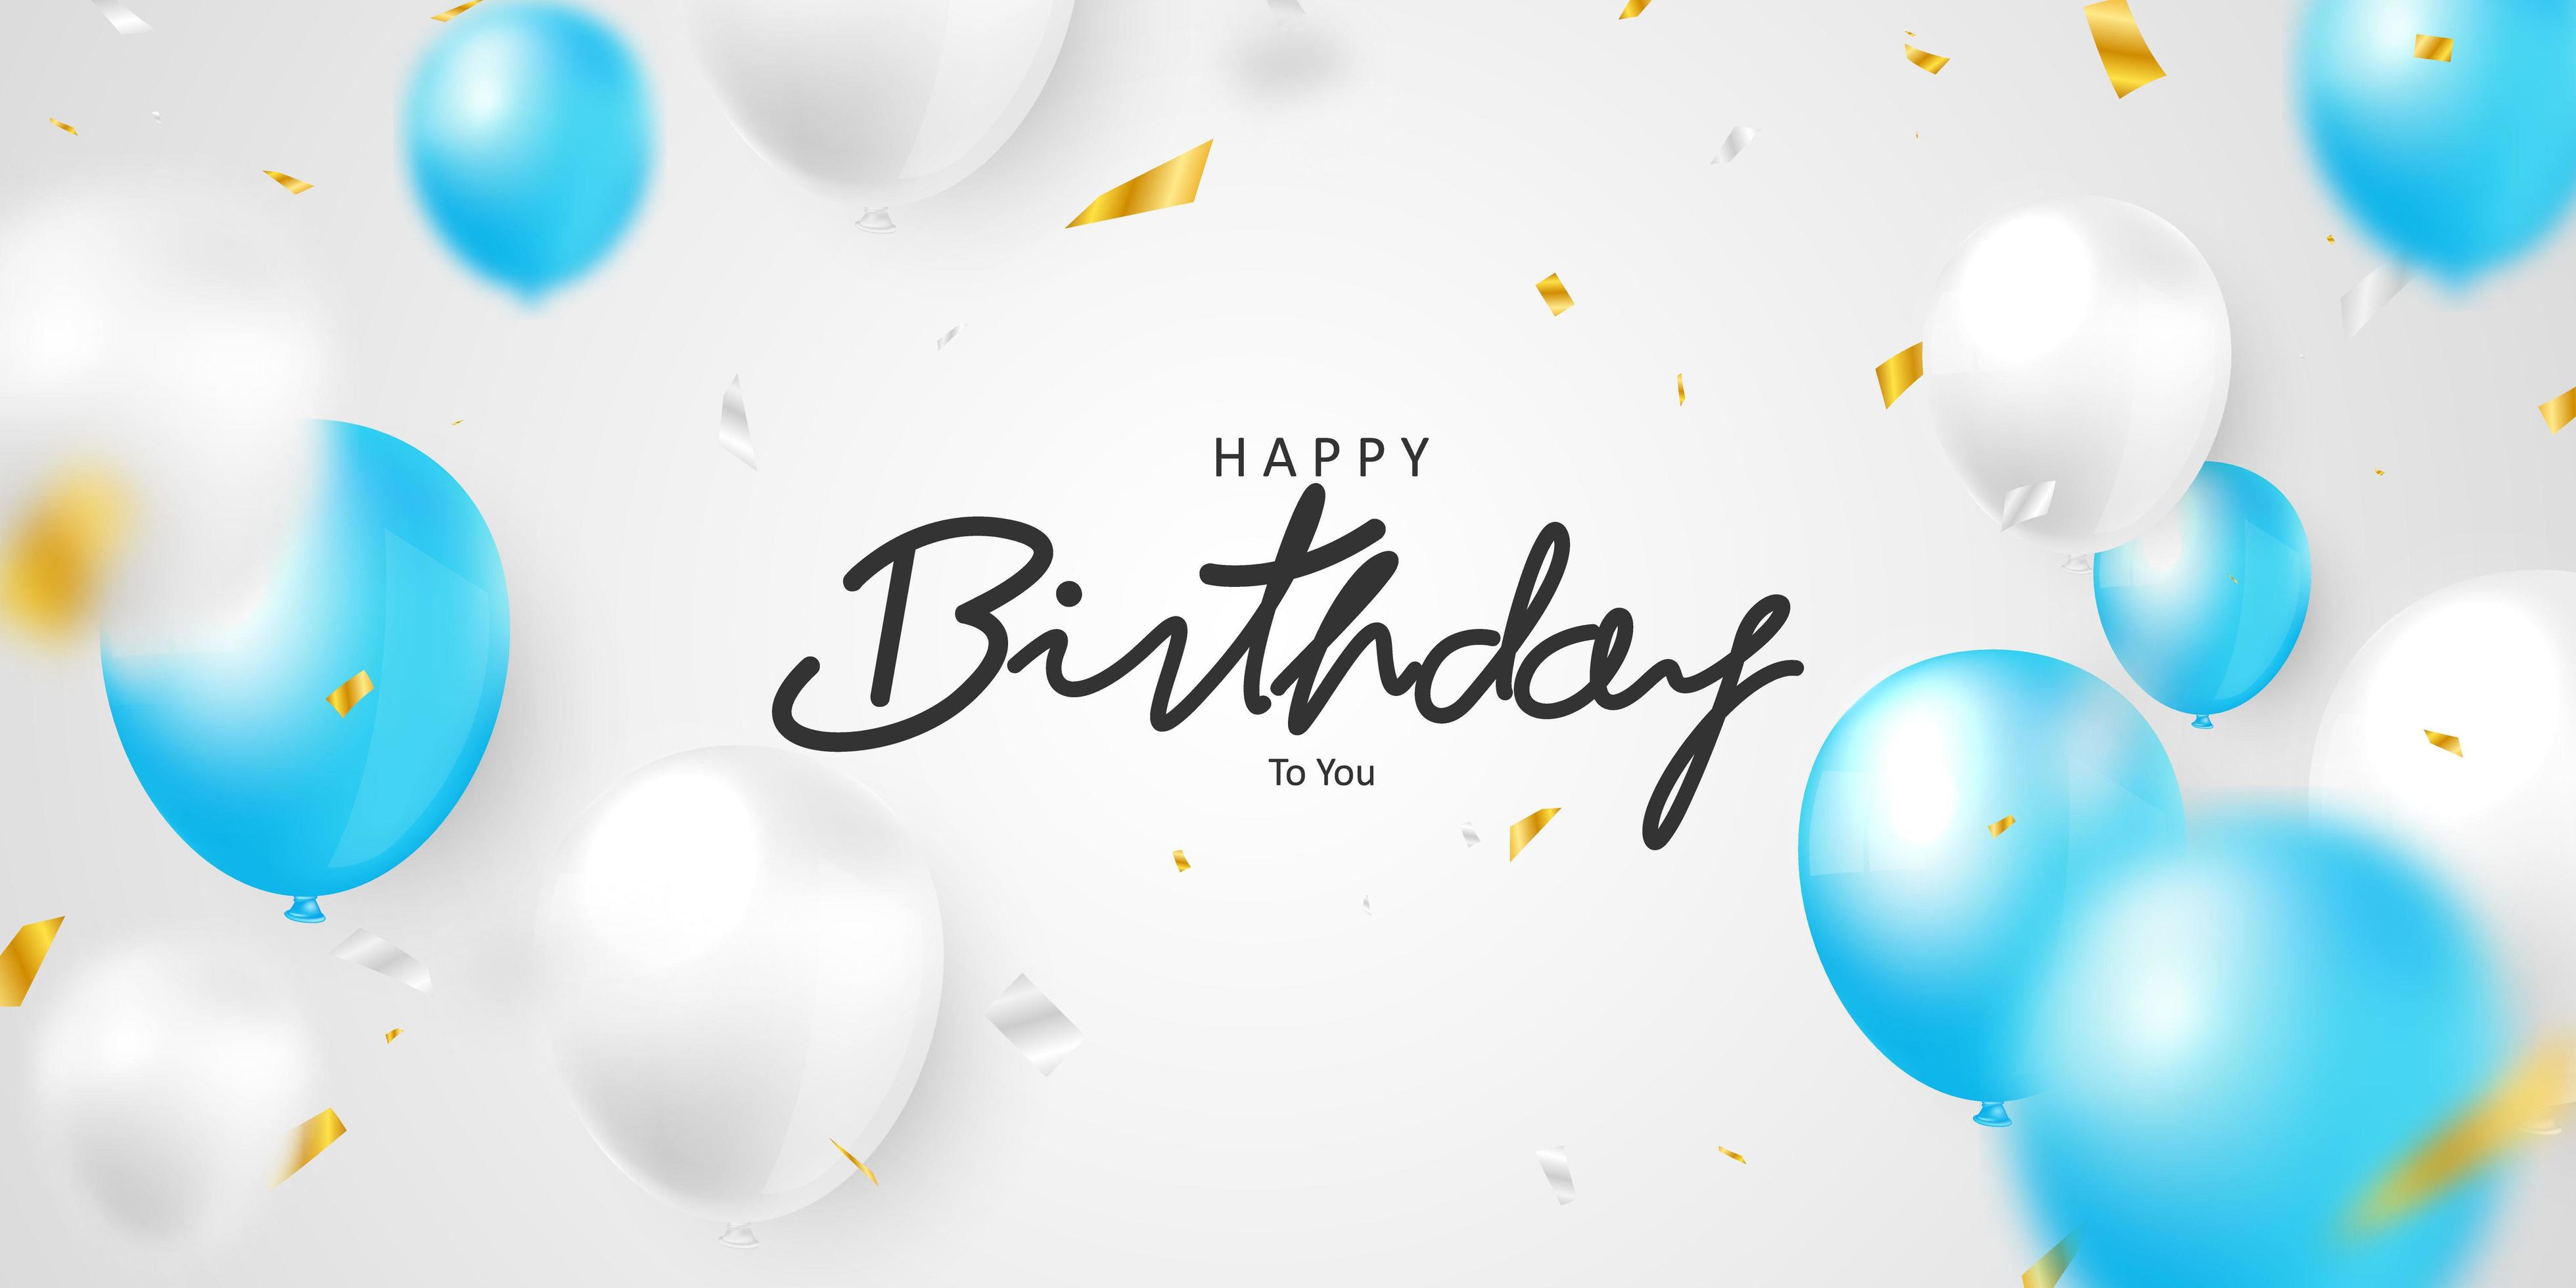 https://static.vecteezy.com/system/resources/previews/001/213/136/large_2x/brithday-design-with-blue-and-white-balloons-vector.jpg